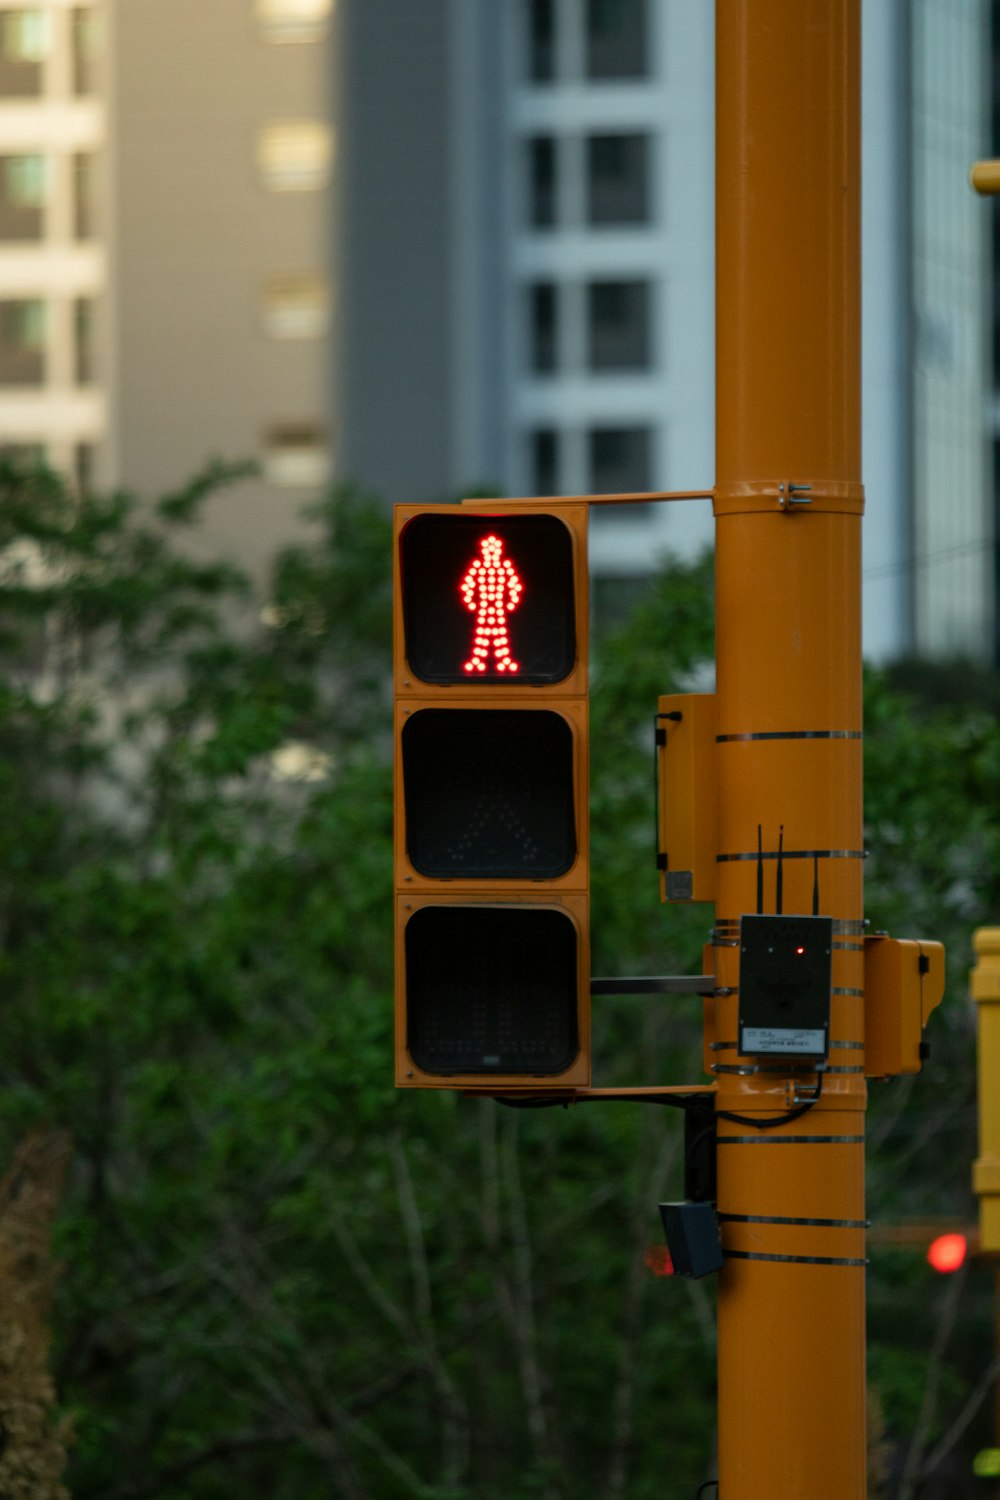 a traffic light with a red pedestrian sign on it